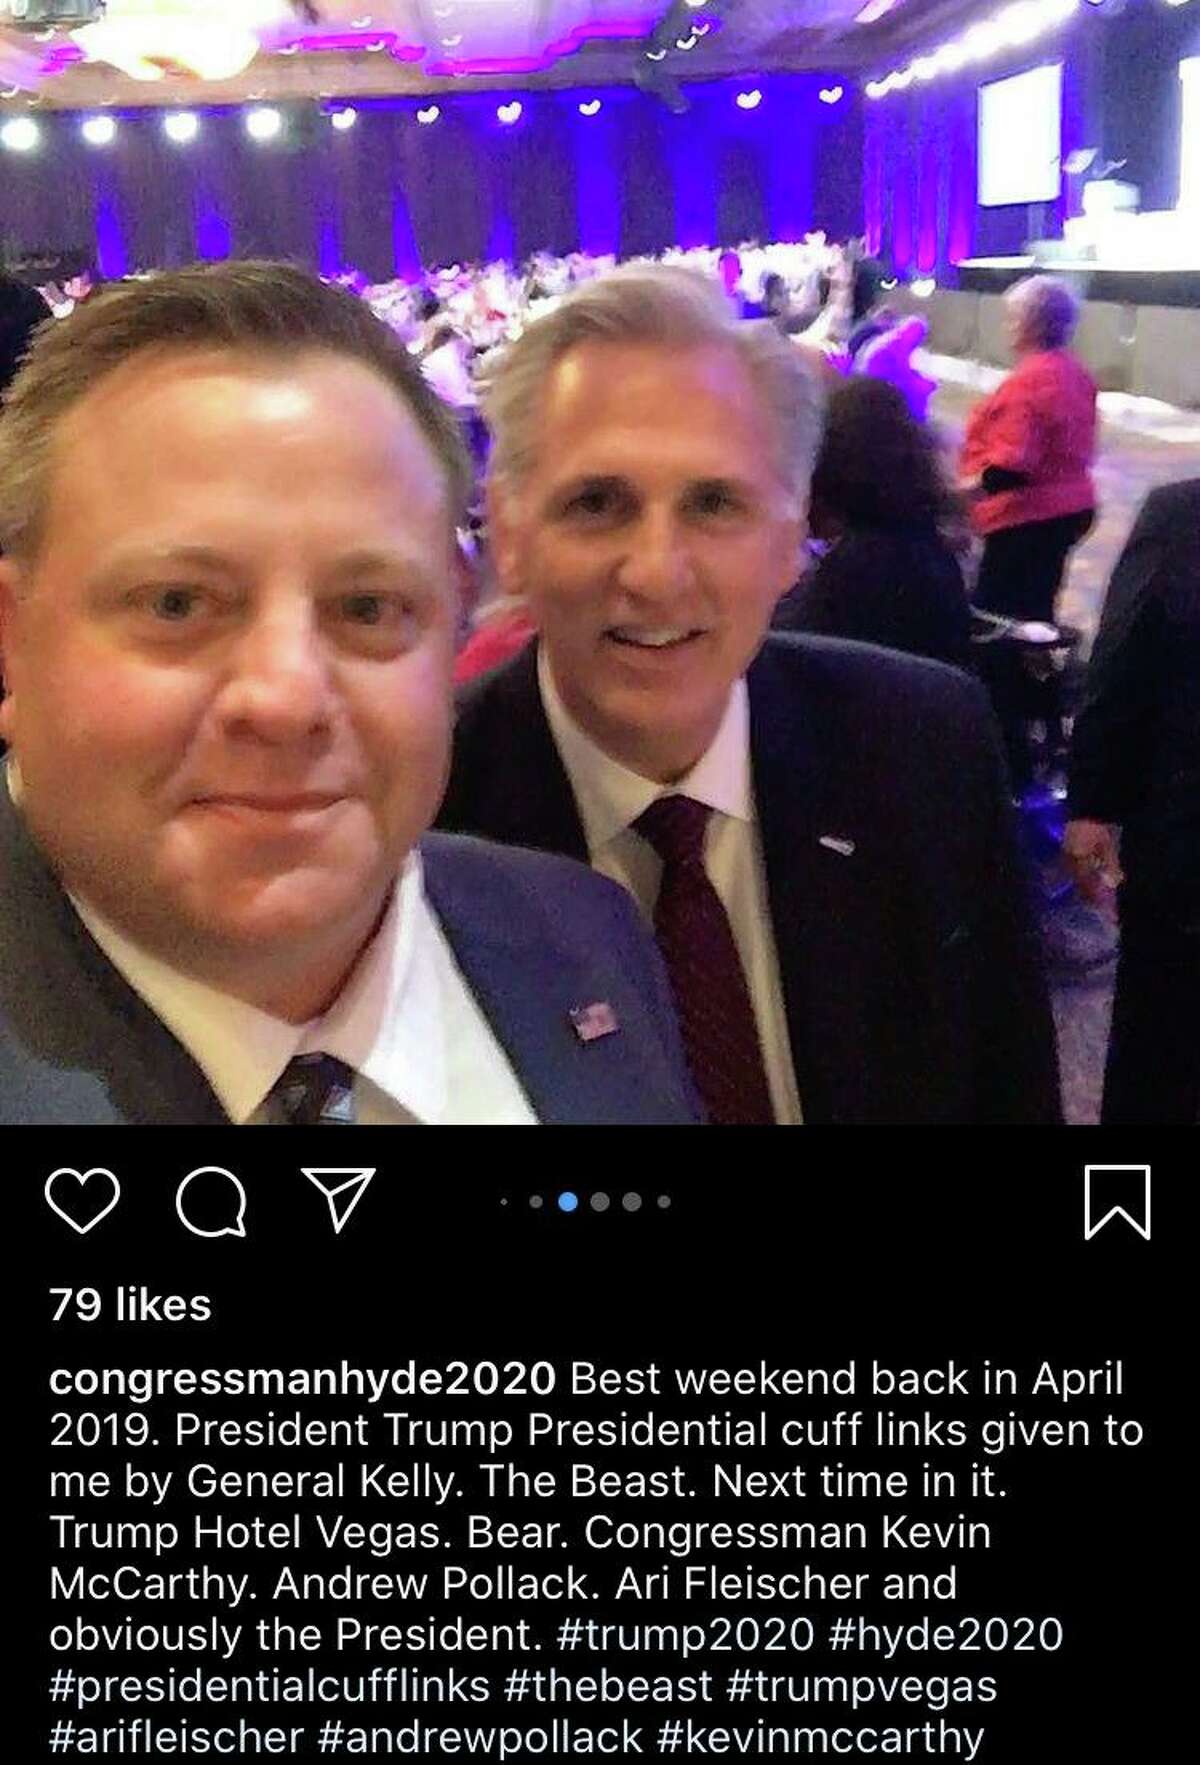 Robert Hyde (left), a Republican candidate for Congress in Connecticut's 5th District, takes a selfie with House Minority Leader Kevin McCarthy, R-Calif., at the Trump International Hotel Las Vegas in Las Vegas, Nevada in this photo Hyde posted on his Instagram.